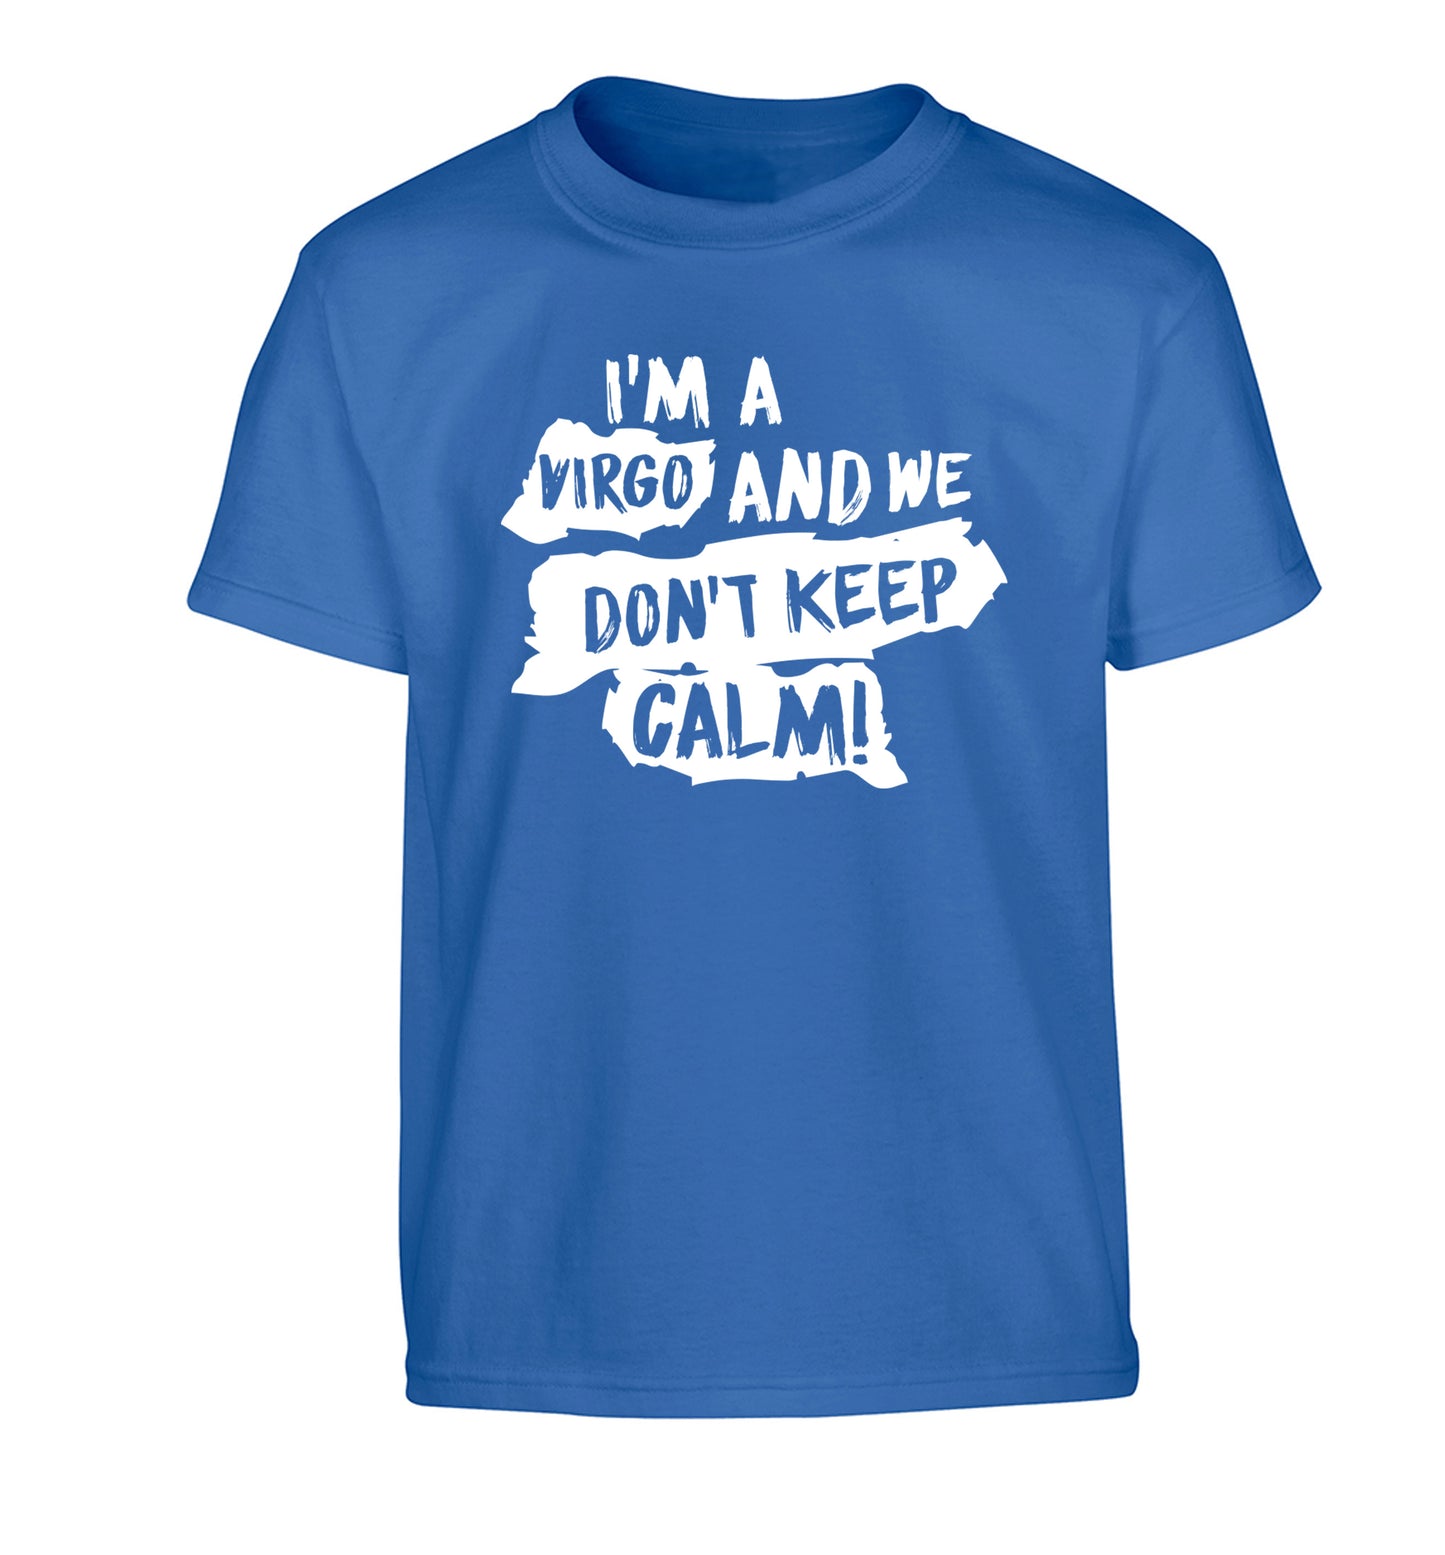 I'm a virgo and we don't keep calm Children's blue Tshirt 12-13 Years